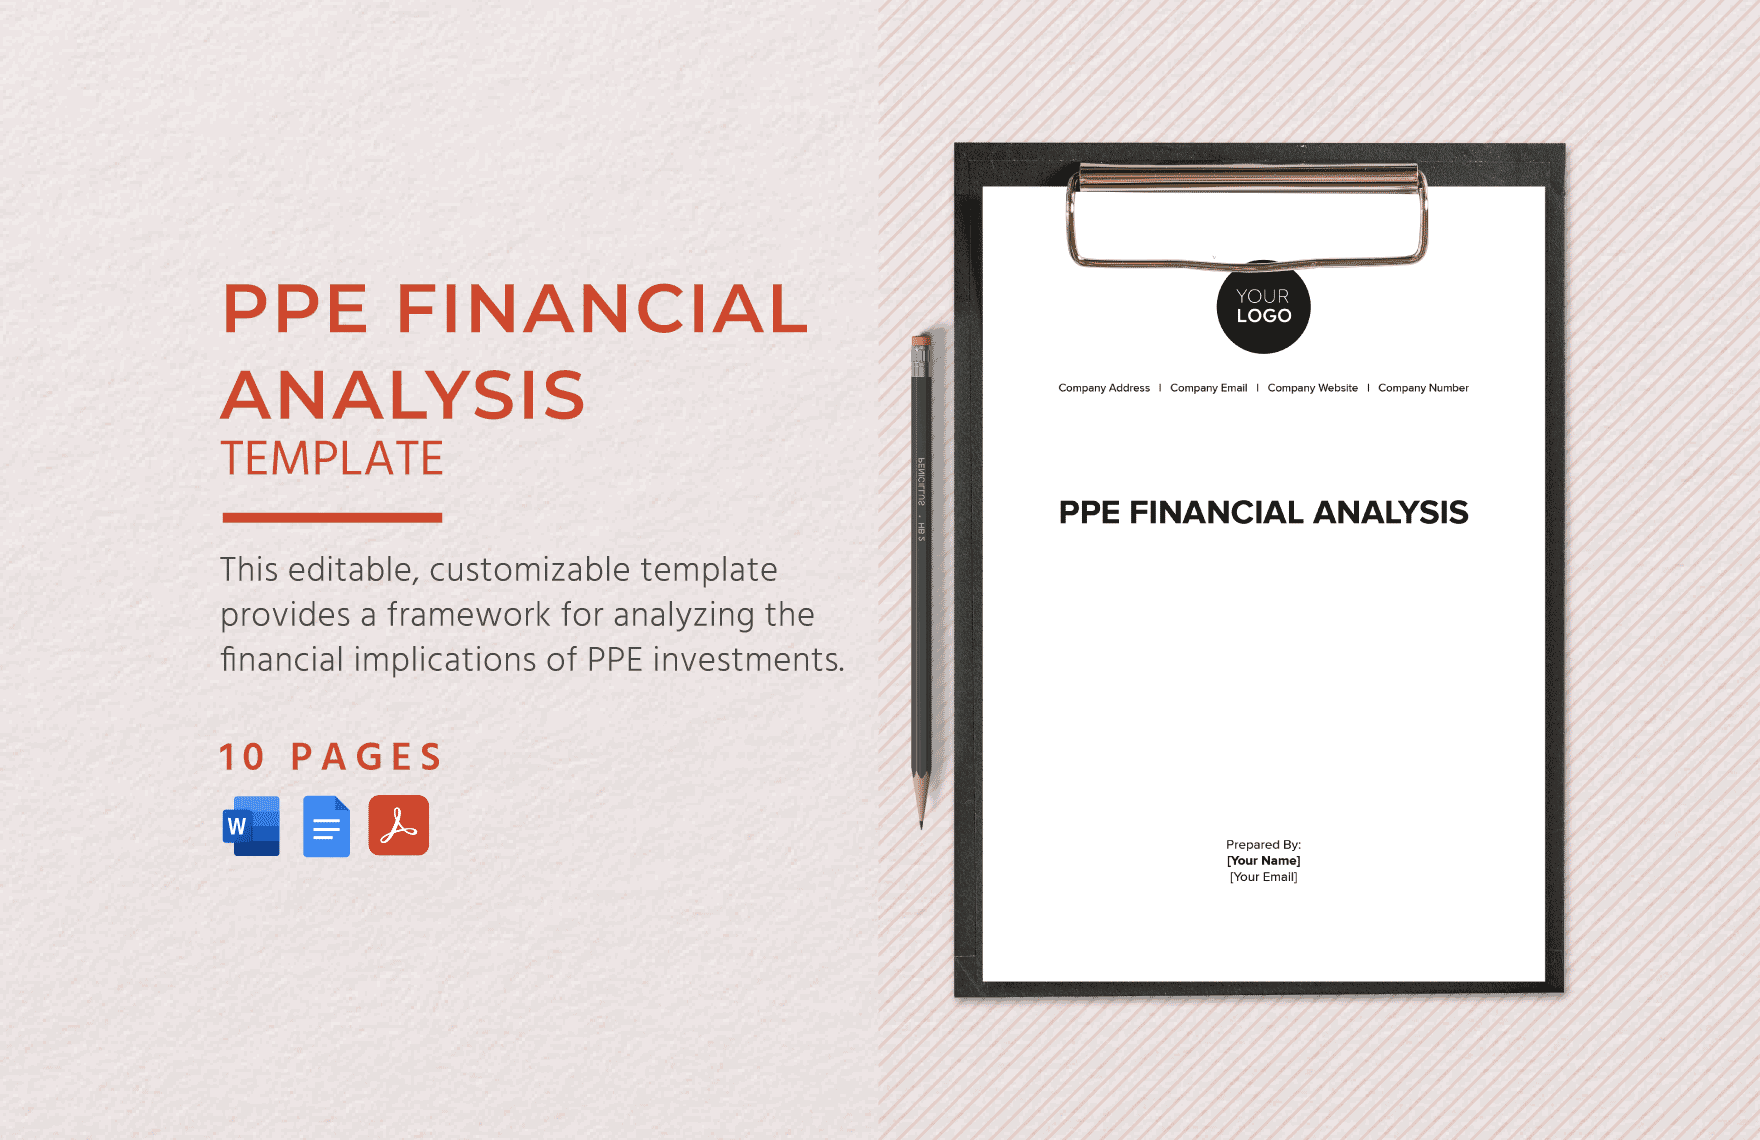 PPE Financial Analysis Template